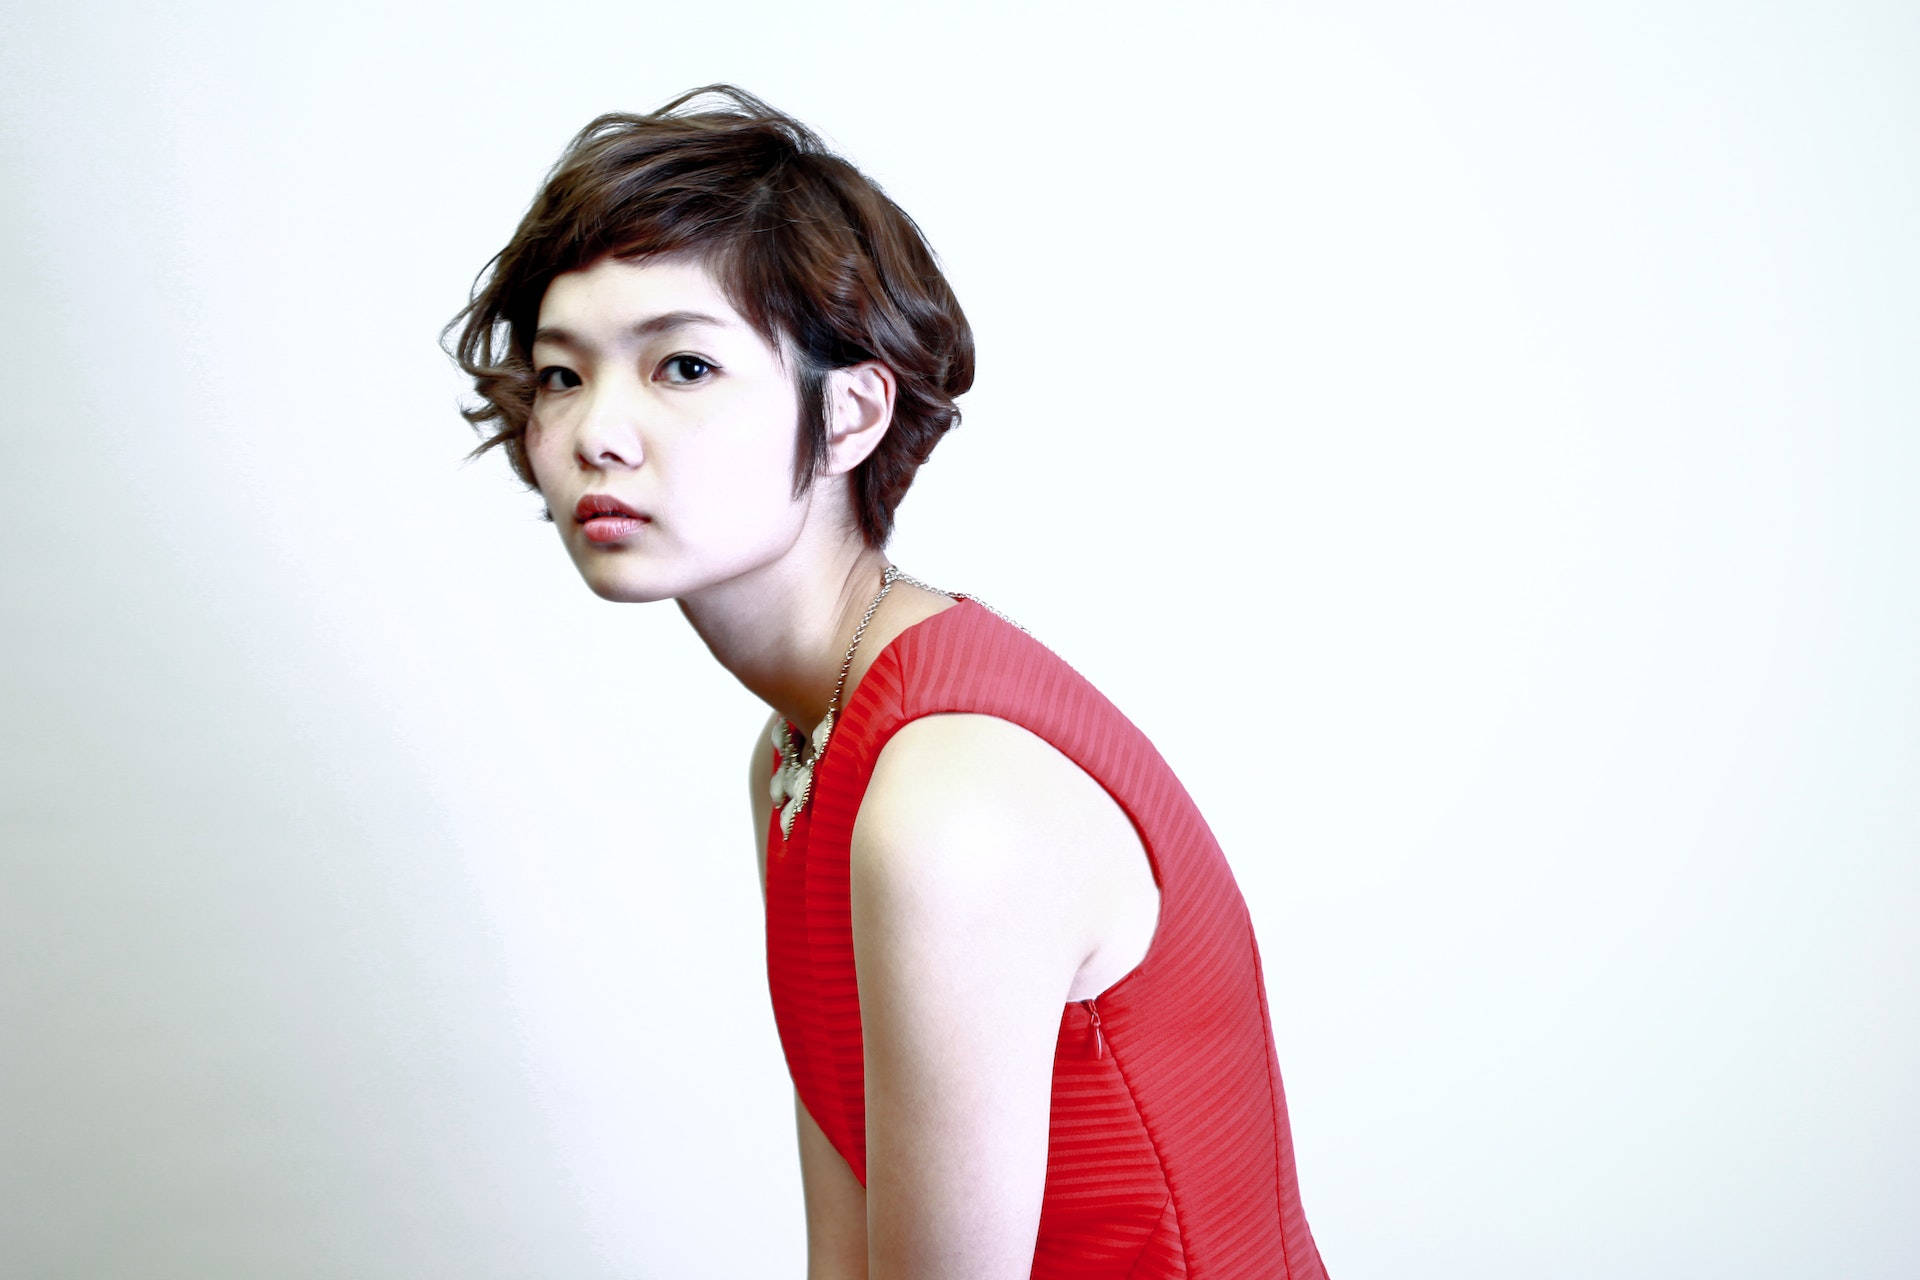 Asian Woman In Red Sleeveless Dress